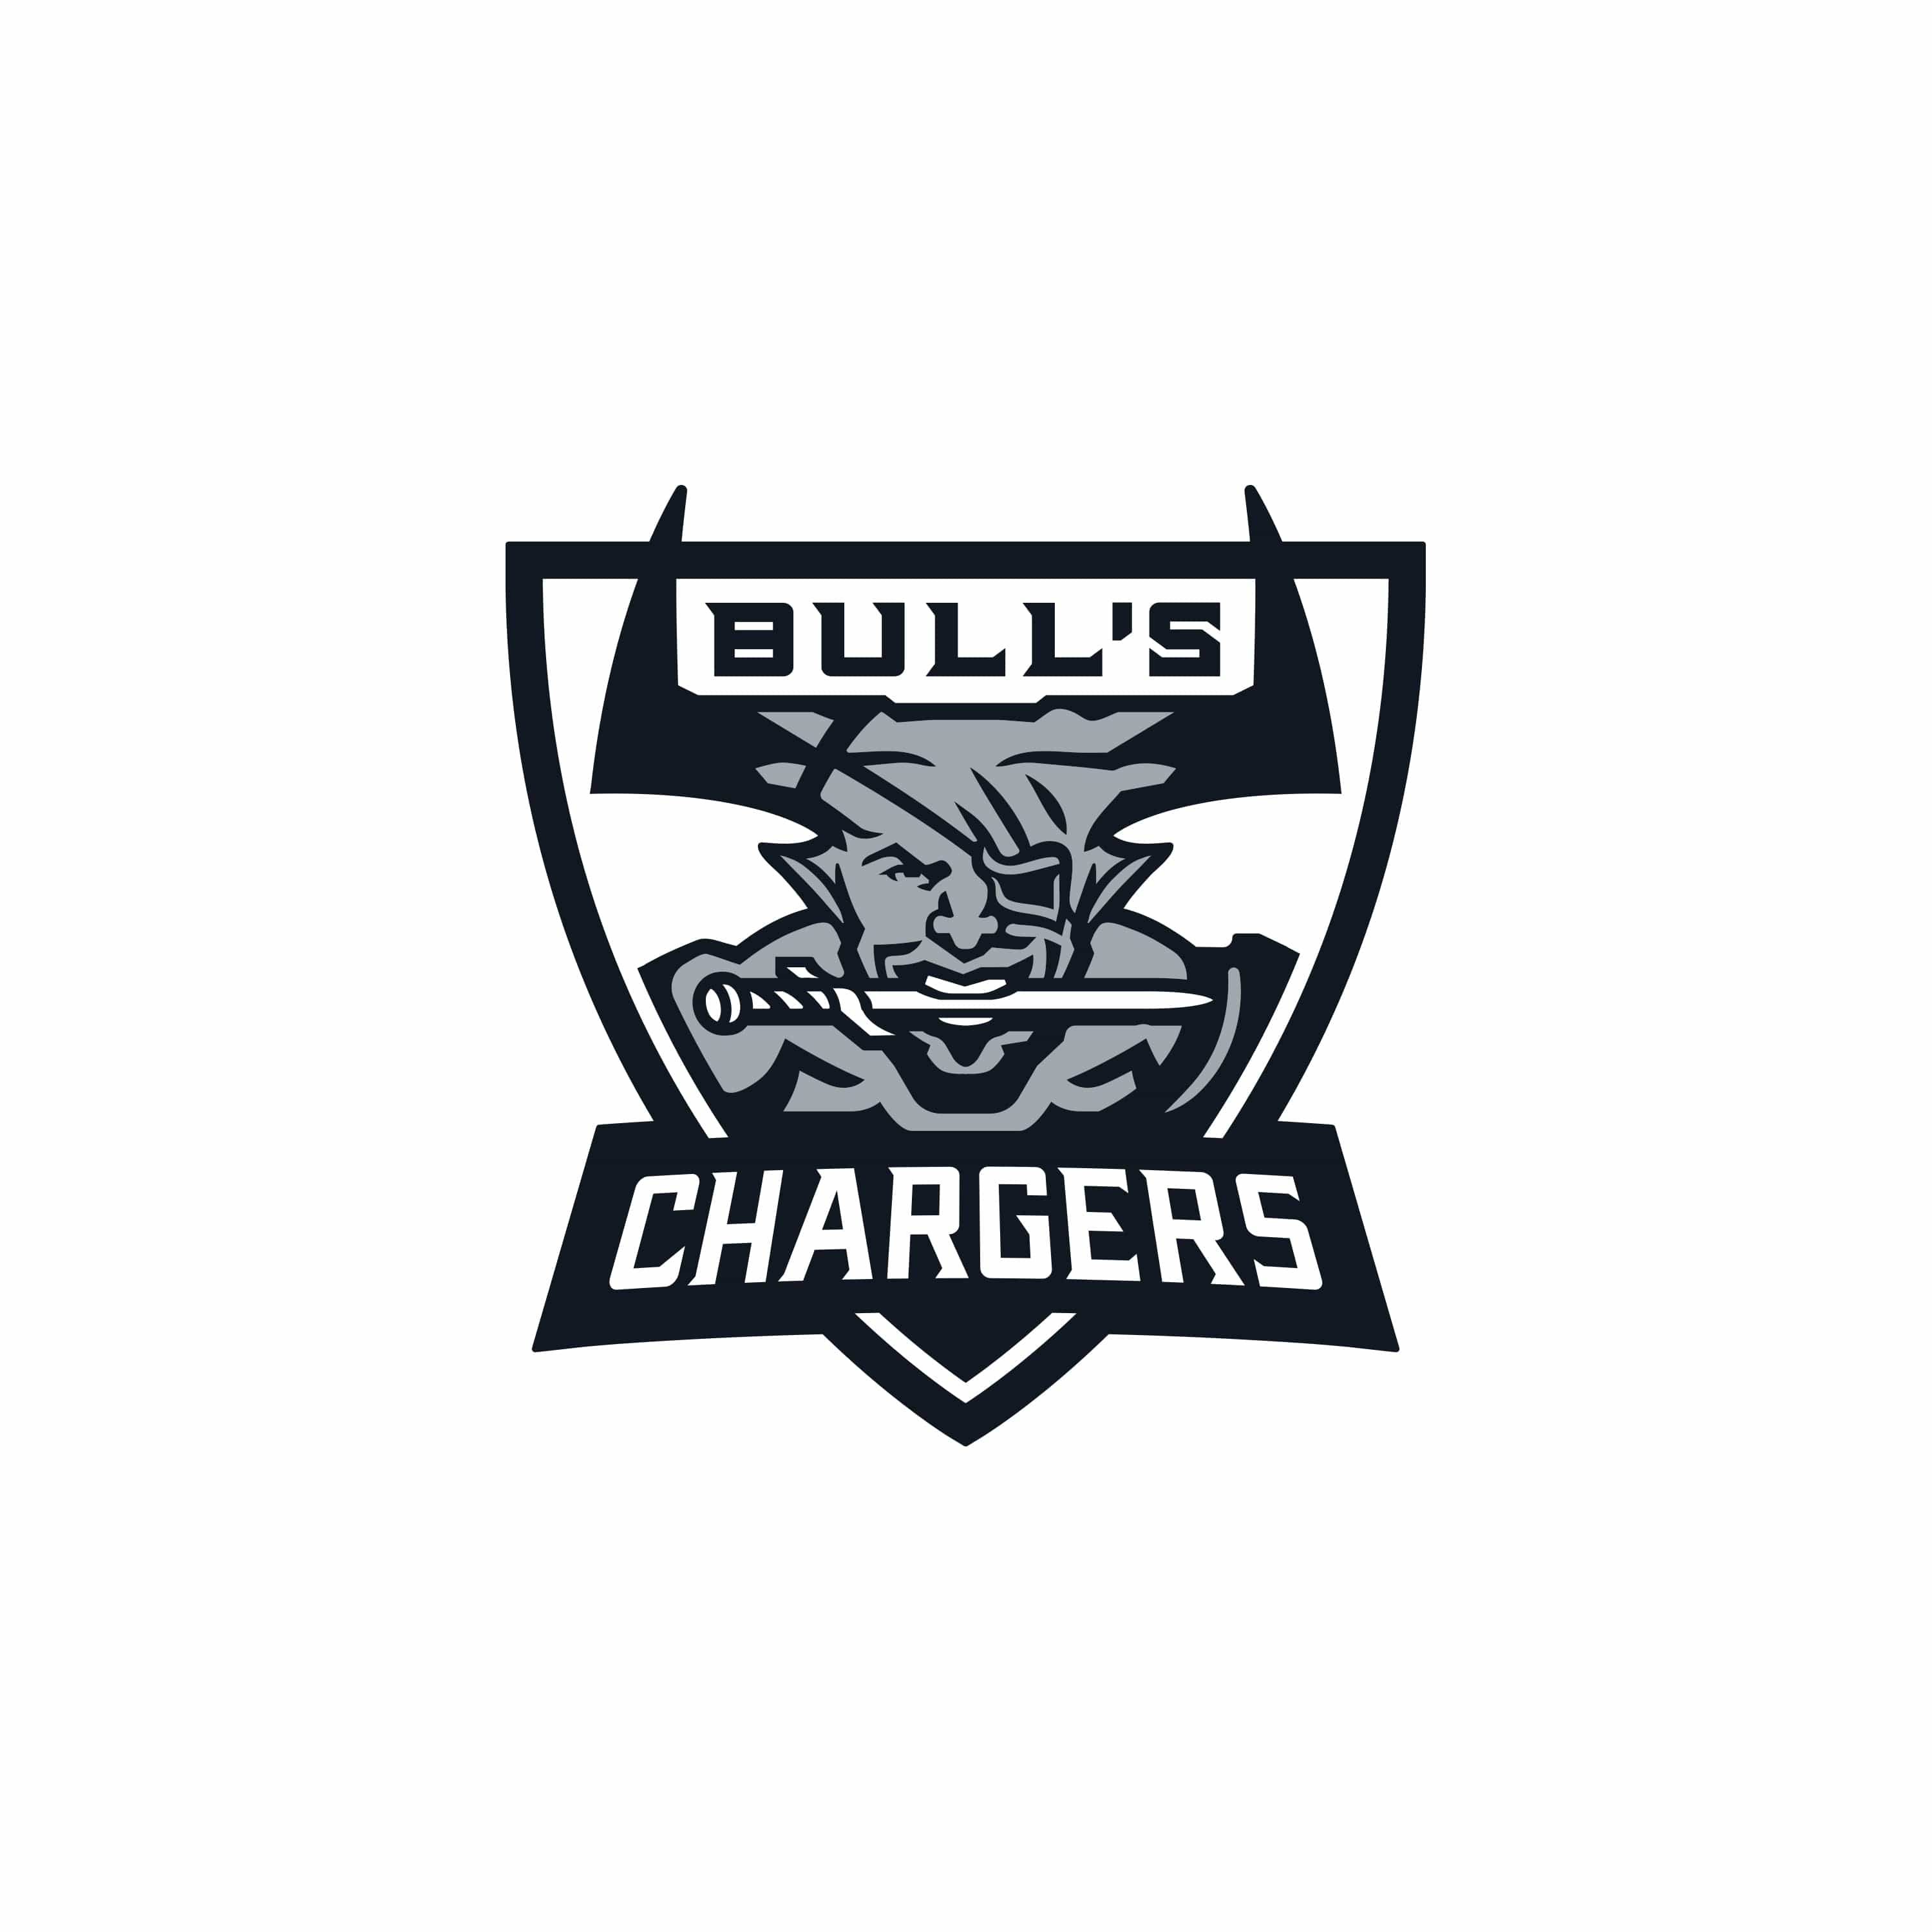 Dragon Age - Bull's Chargers Vinyl Sticker